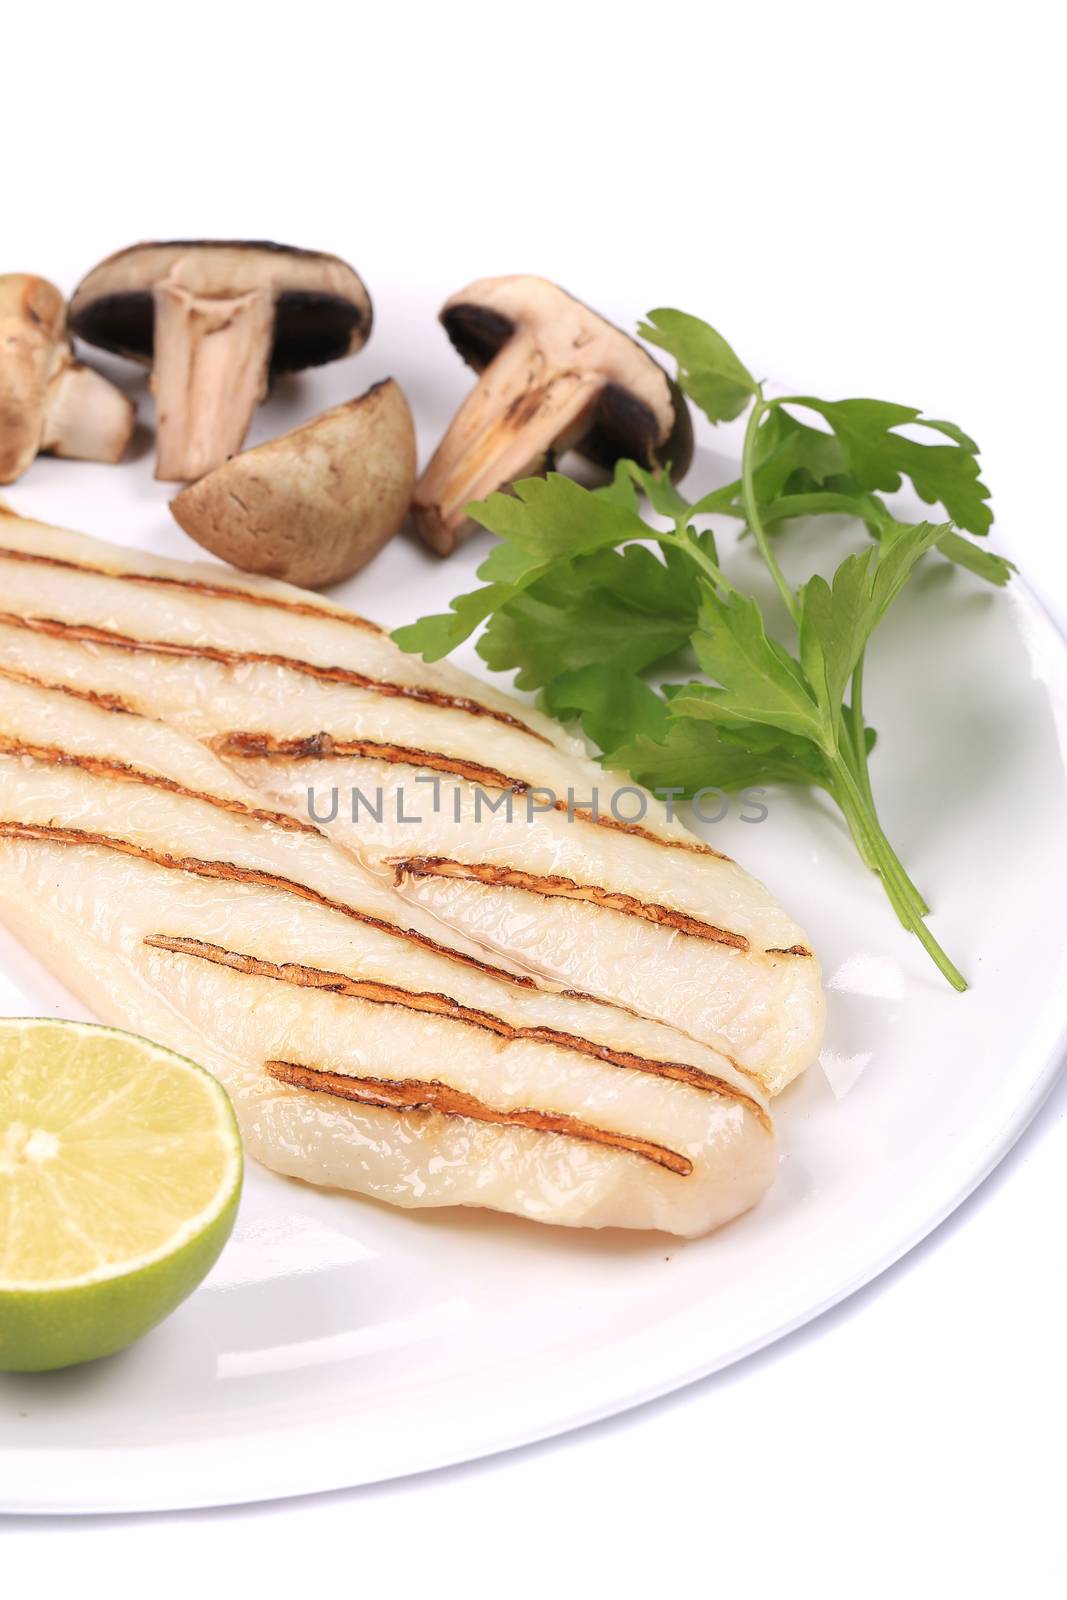 Grilled fish fillet with mushrooms. by indigolotos